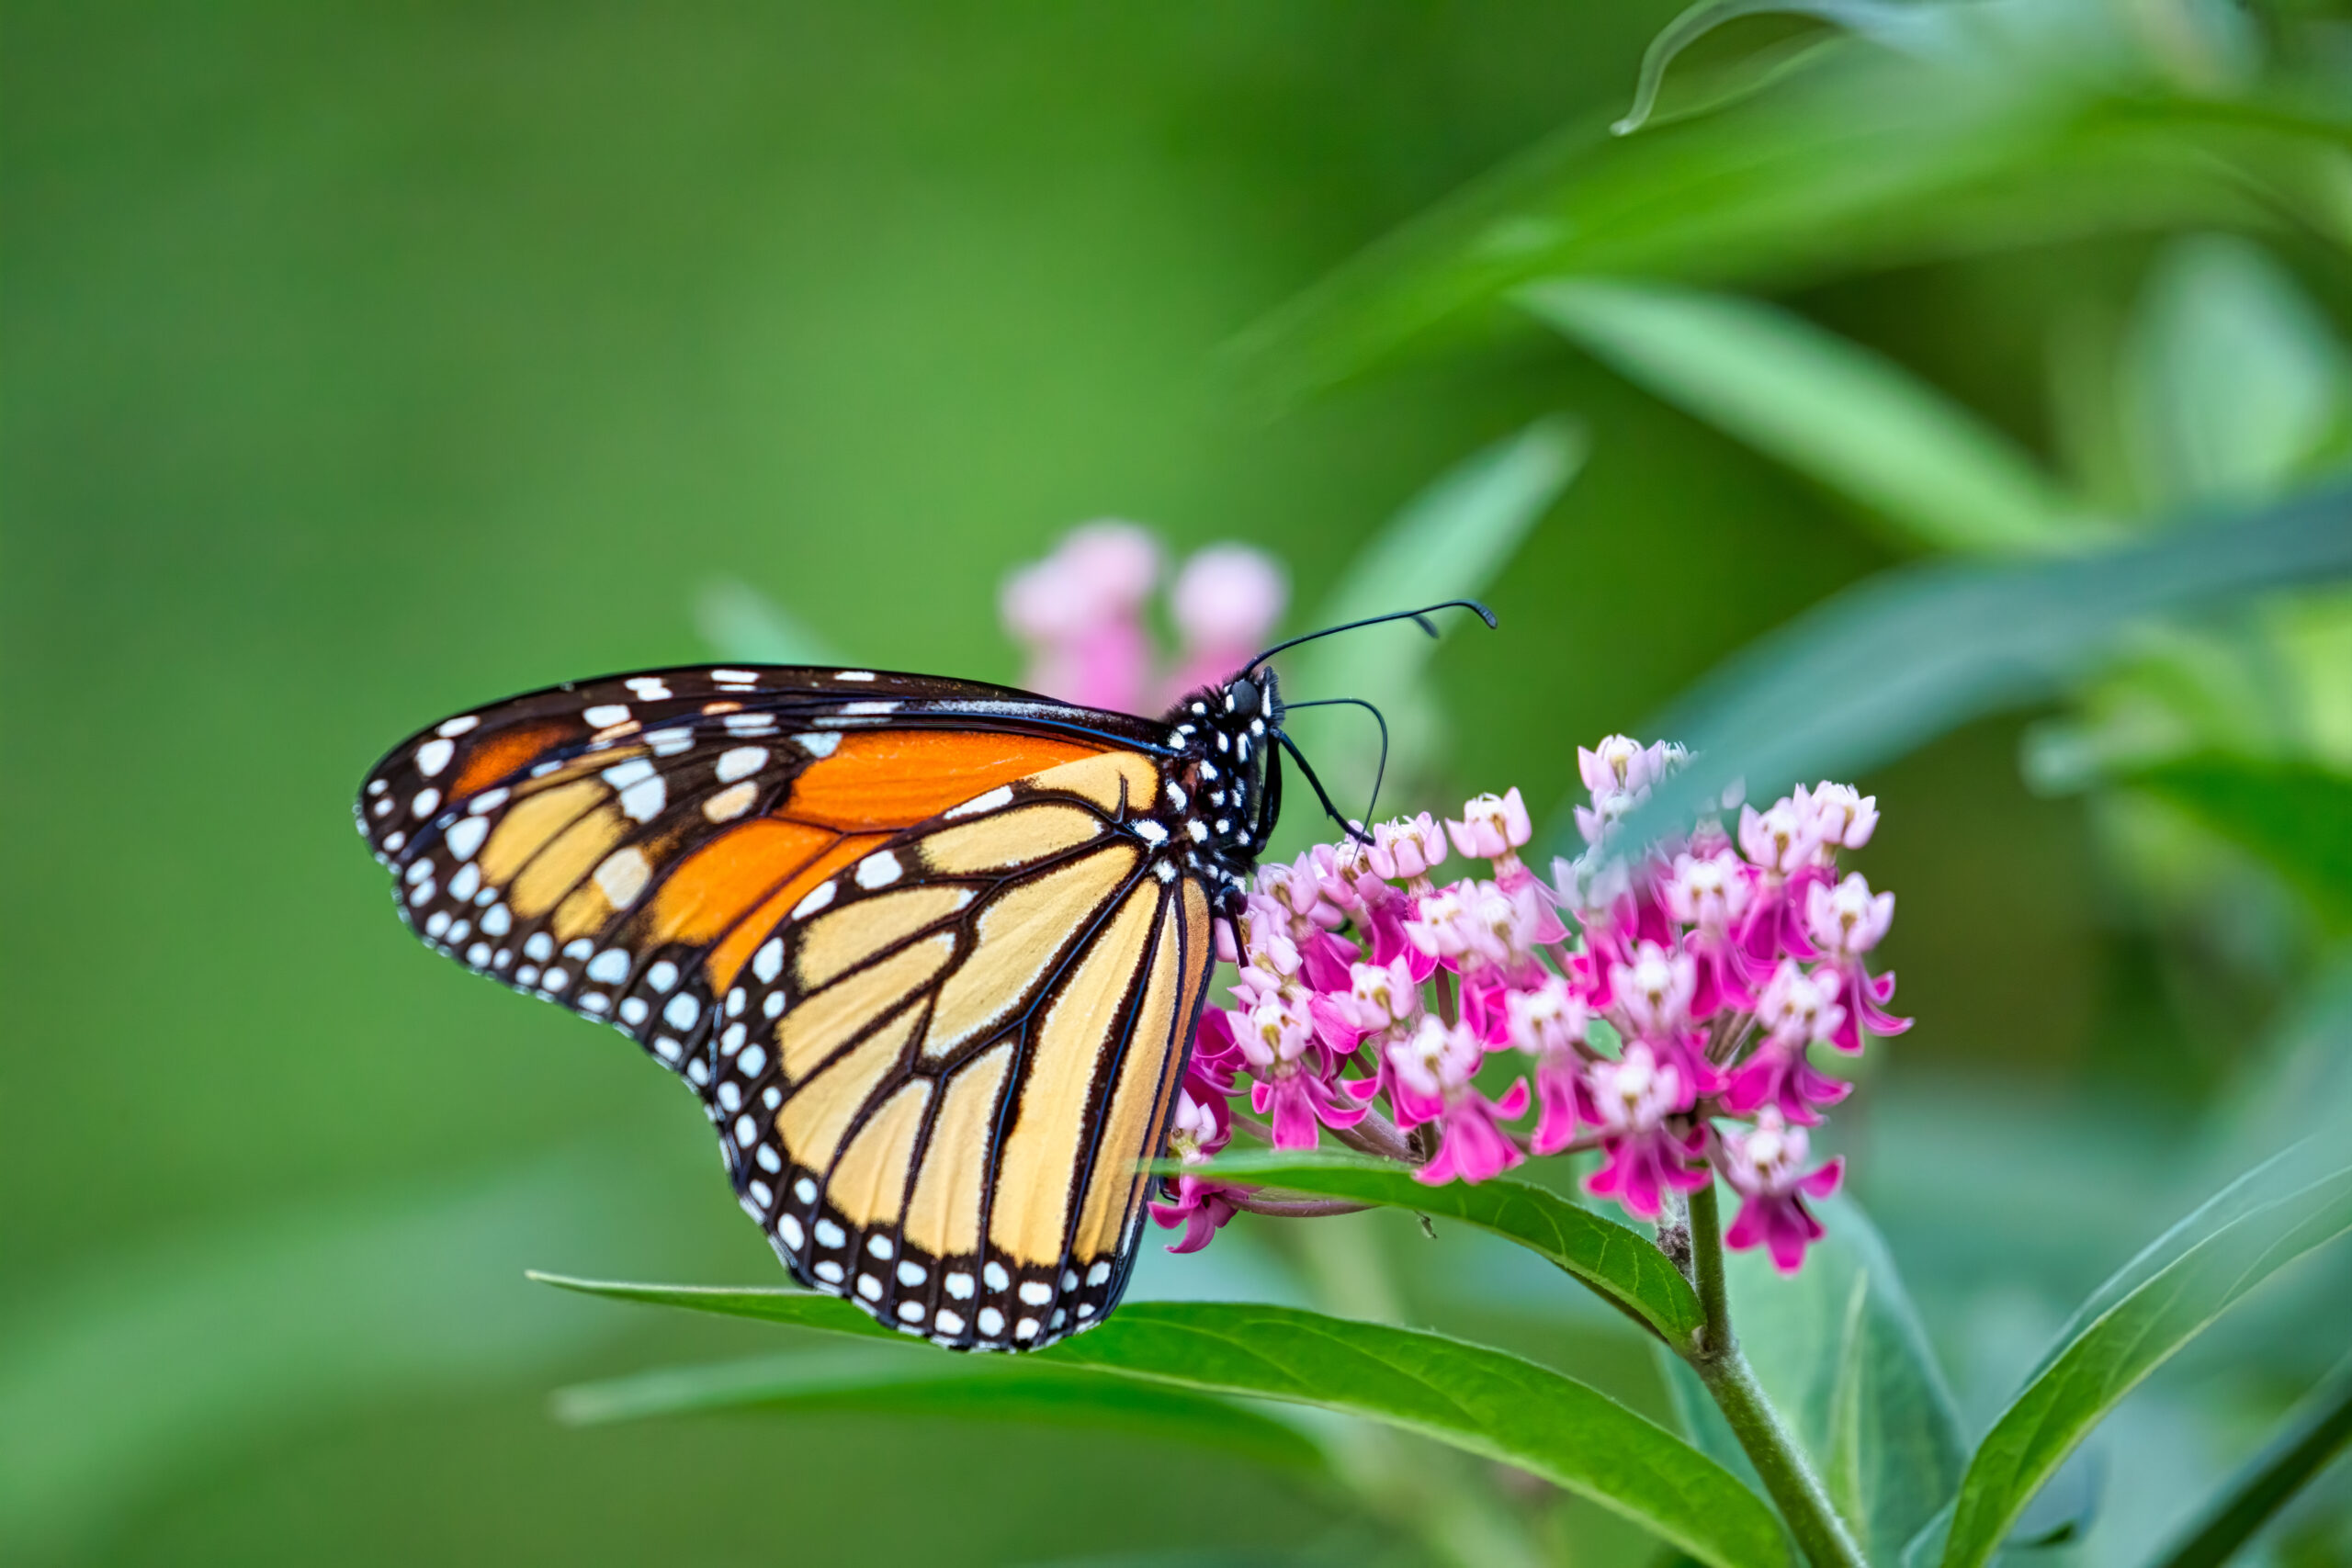 Monarch butterfly drinking nectar from pink Swamp milkweed flowers